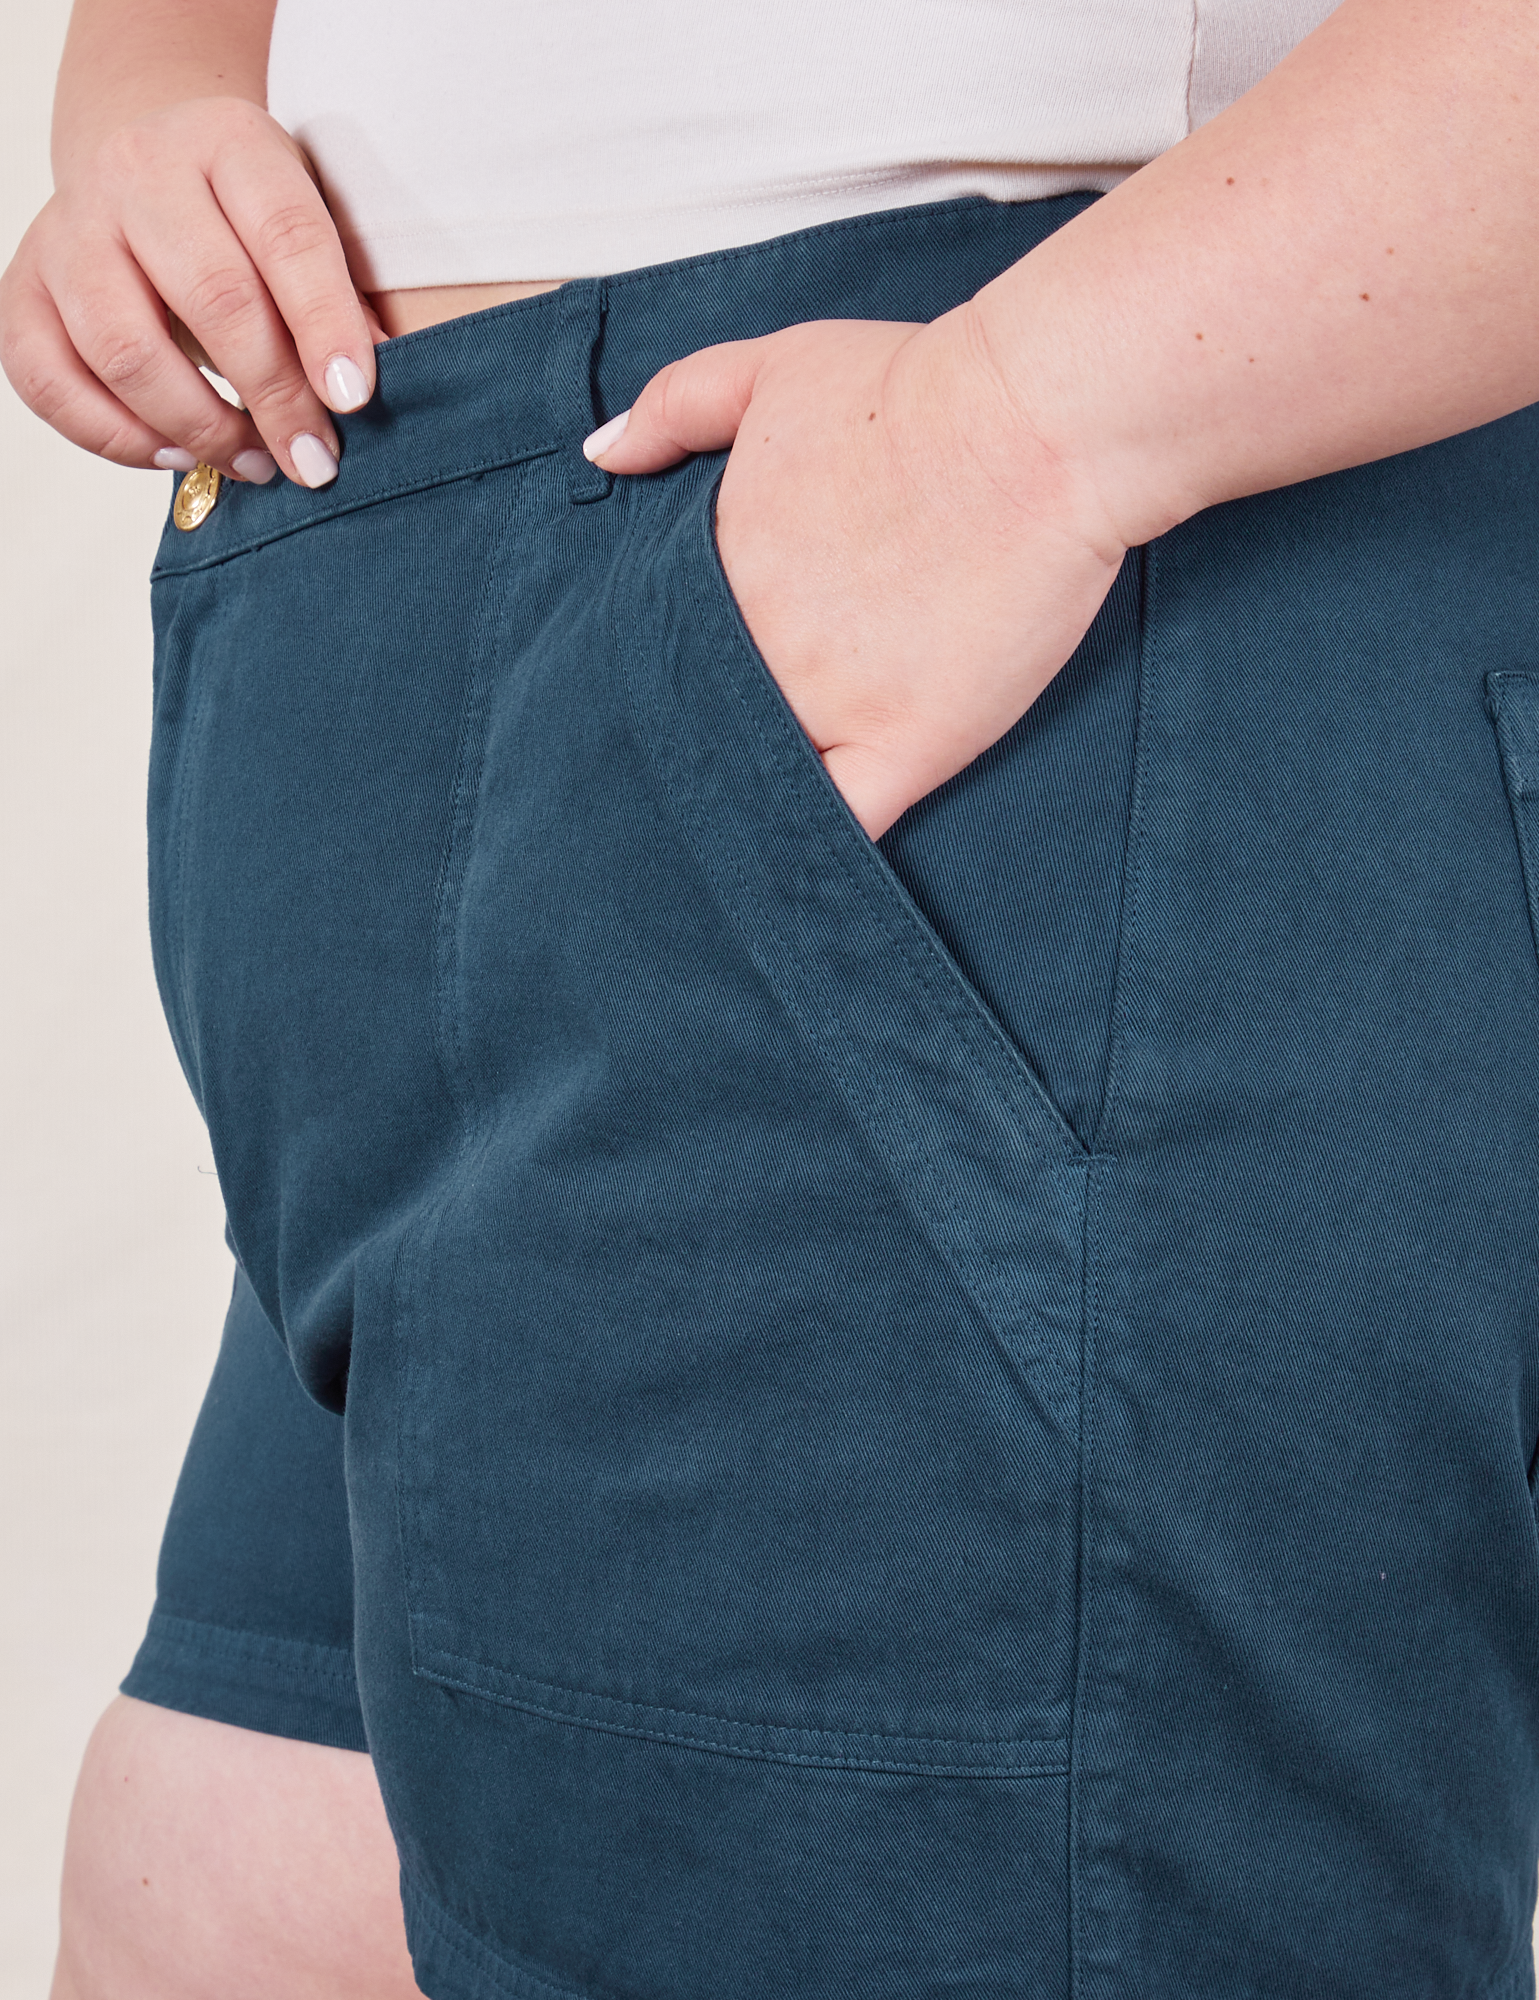 Classic Work Shorts in Lagoon front pocket close up. Ashley has her hand in the pocket.